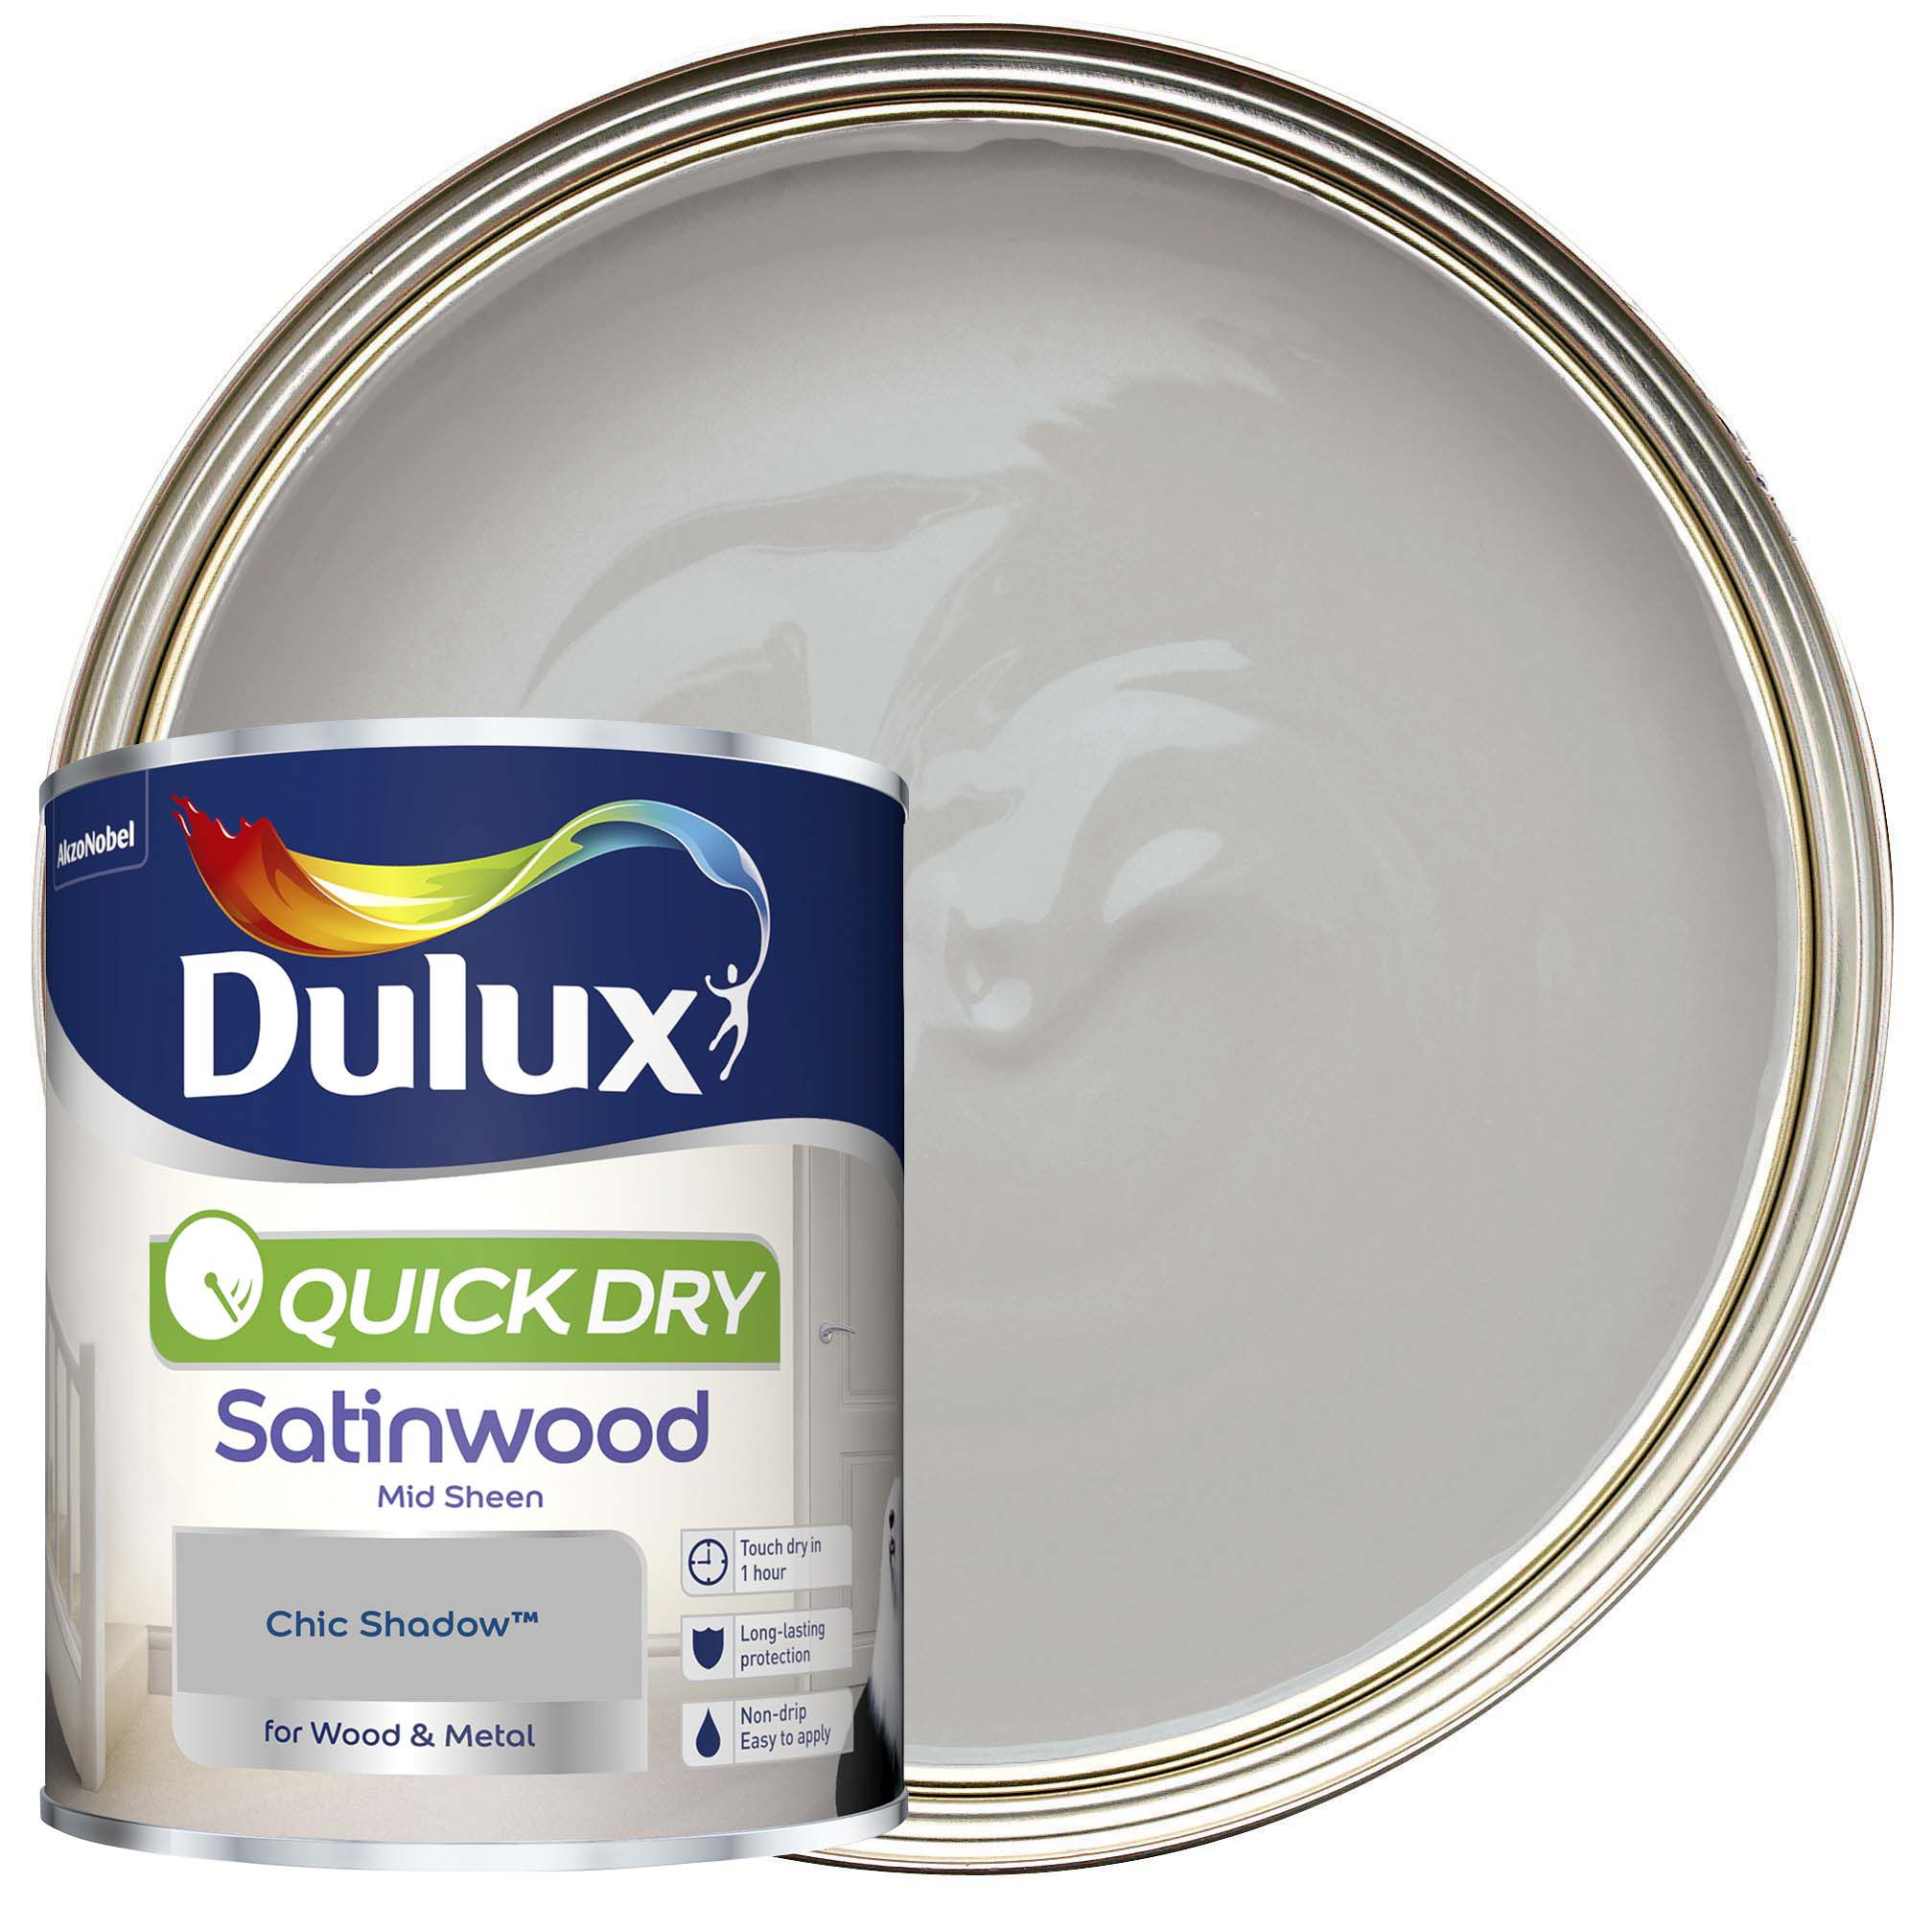 Image of Dulux Quick Drying Satinwood Paint - Chic Shadow - 750ml